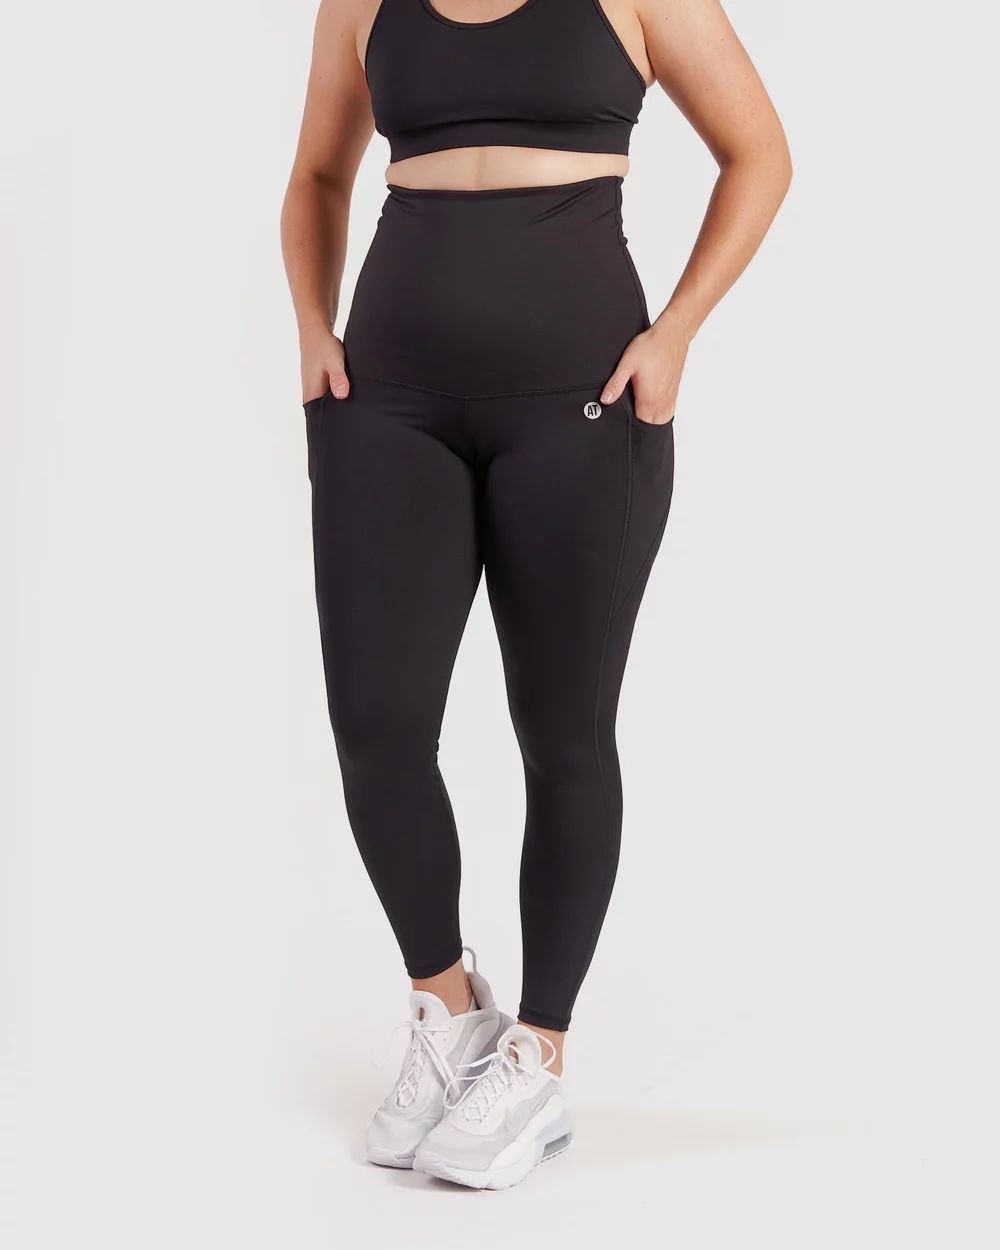 Postnatal Recovery Pocket Full Length Tight - Black | THE ICONIC (AU & NZ)